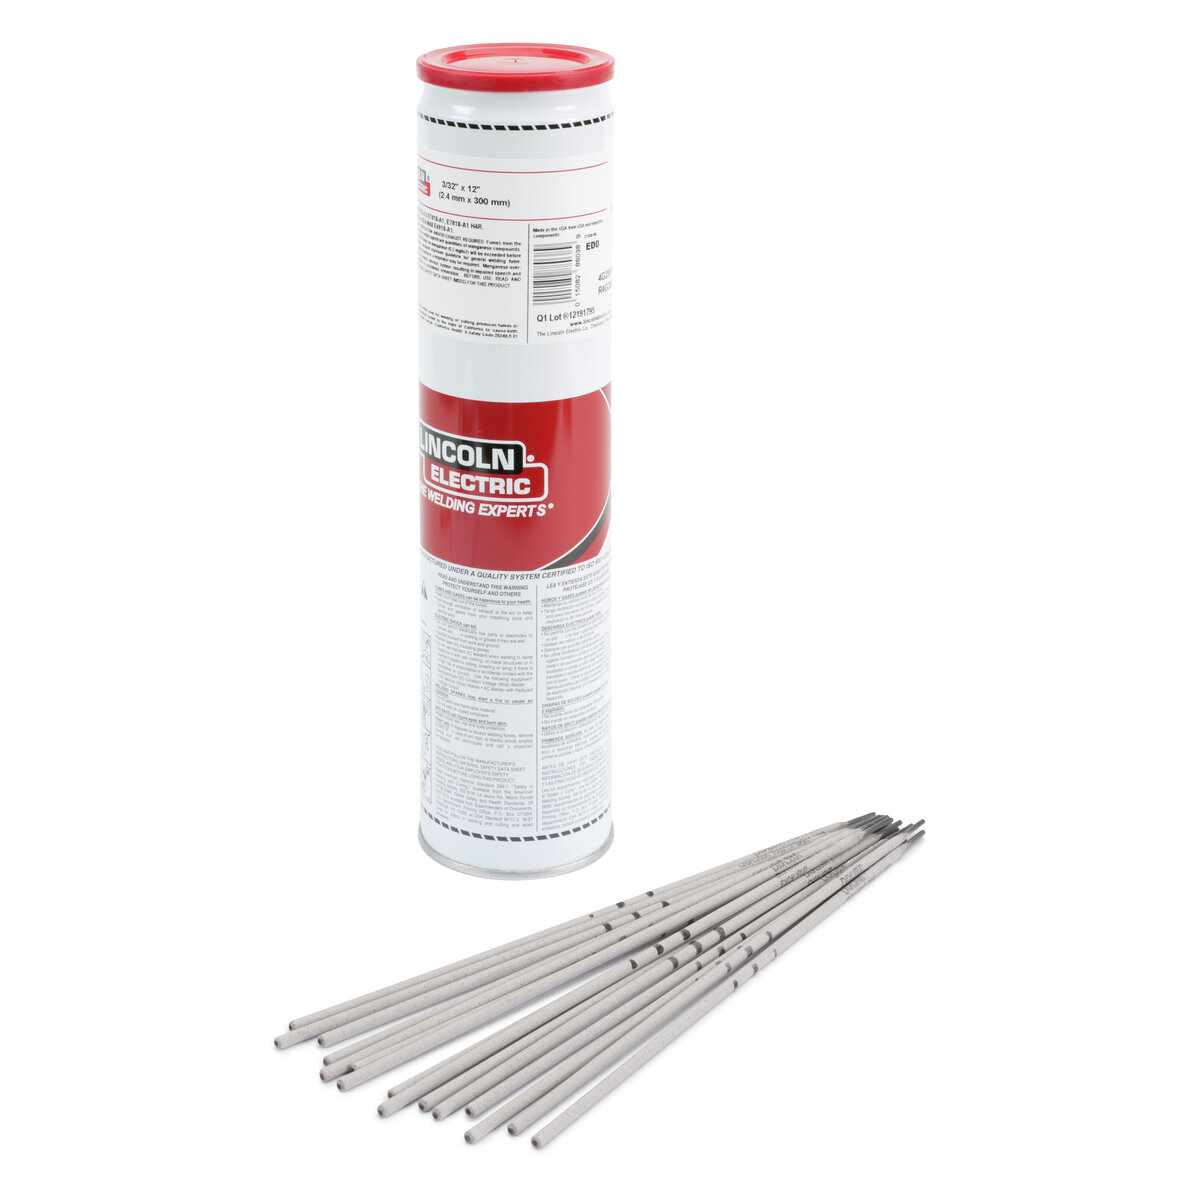 Lincoln Electric® Excalibur® 8018-C3 MR® ED032599 Stick Electrode, 3/32 in Dia x 14 in L, 10 lb Easy Open Can